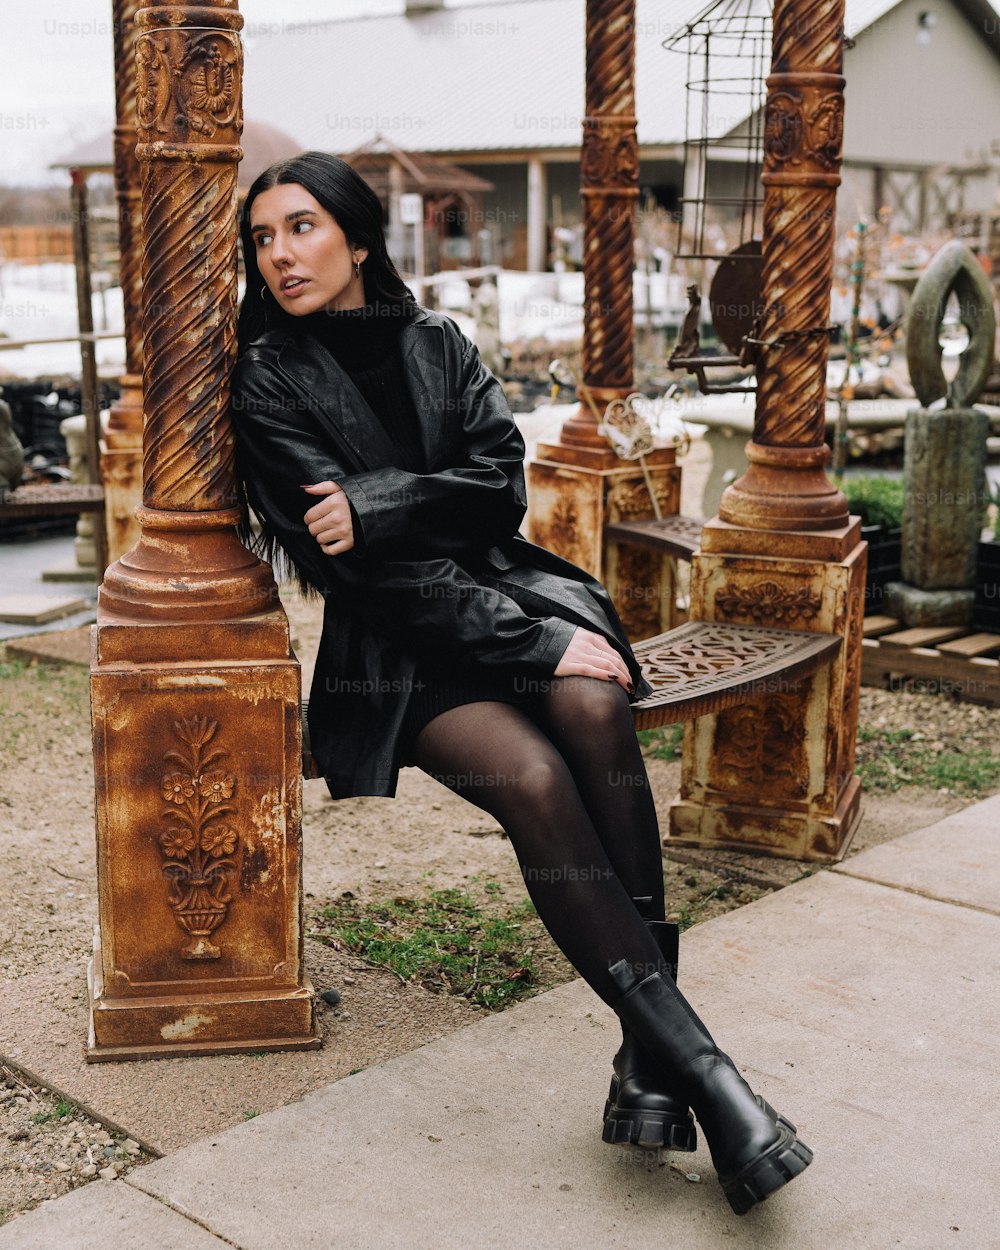 a woman sitting on a bench in a black dress